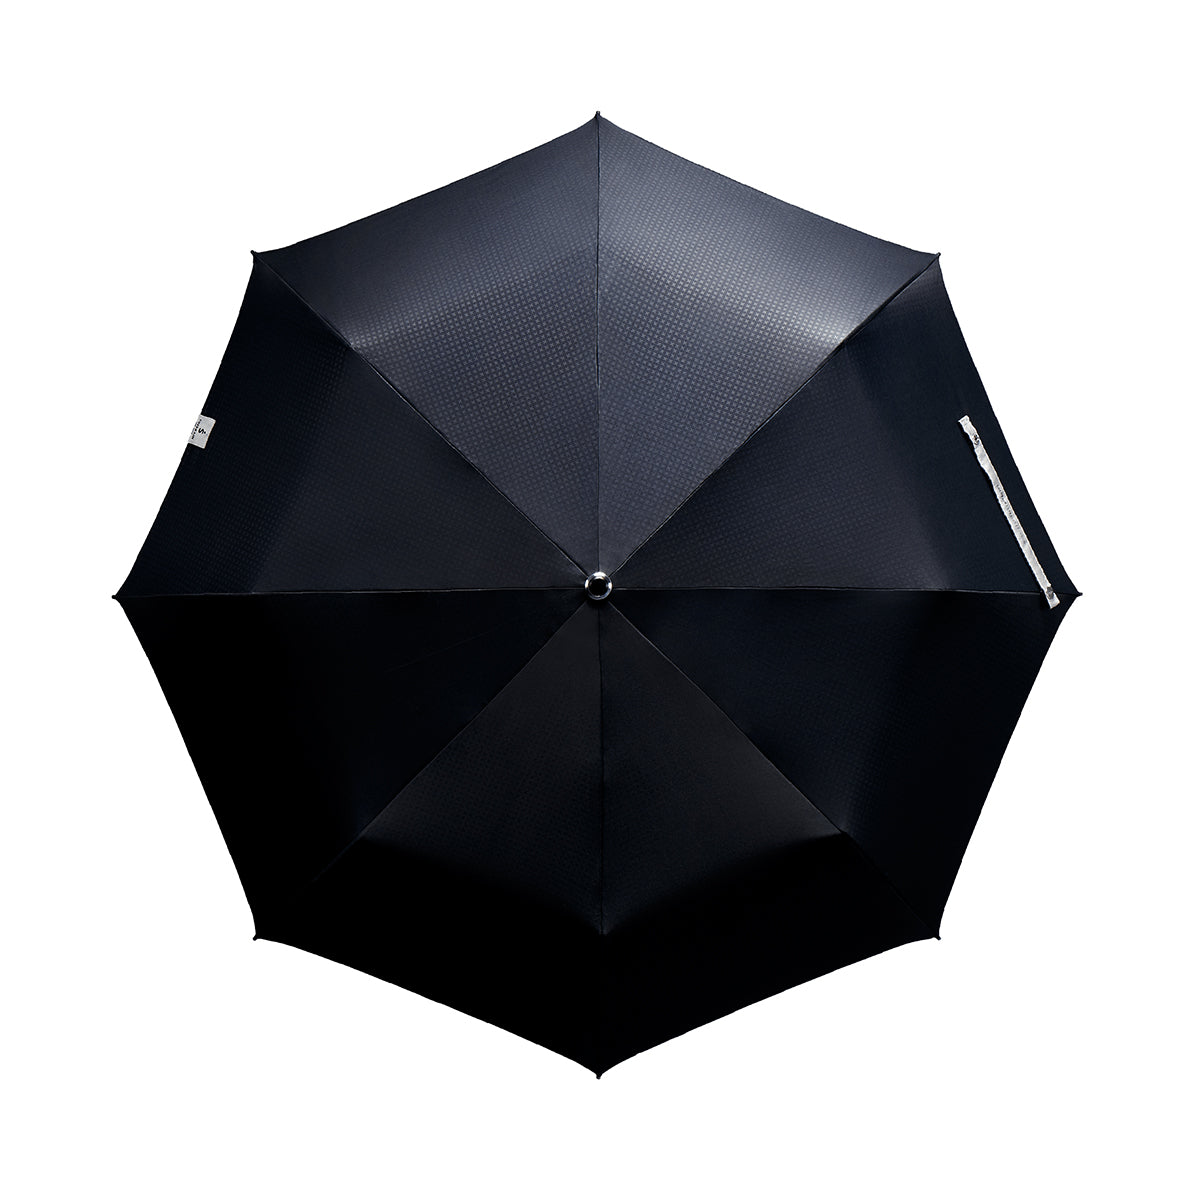 straight on view of a handmade manual open compact luxury umbrella with a glossy piano finish black handle, detachable waxed cotton wrist strap, Teflon-coated fine denier woven black polyester twill canopy, chrome trim, Trilobe aircraft aluminum shaft, fiberglass ribs, and a reflective strap embroidered with “ShedRain Stratus.”